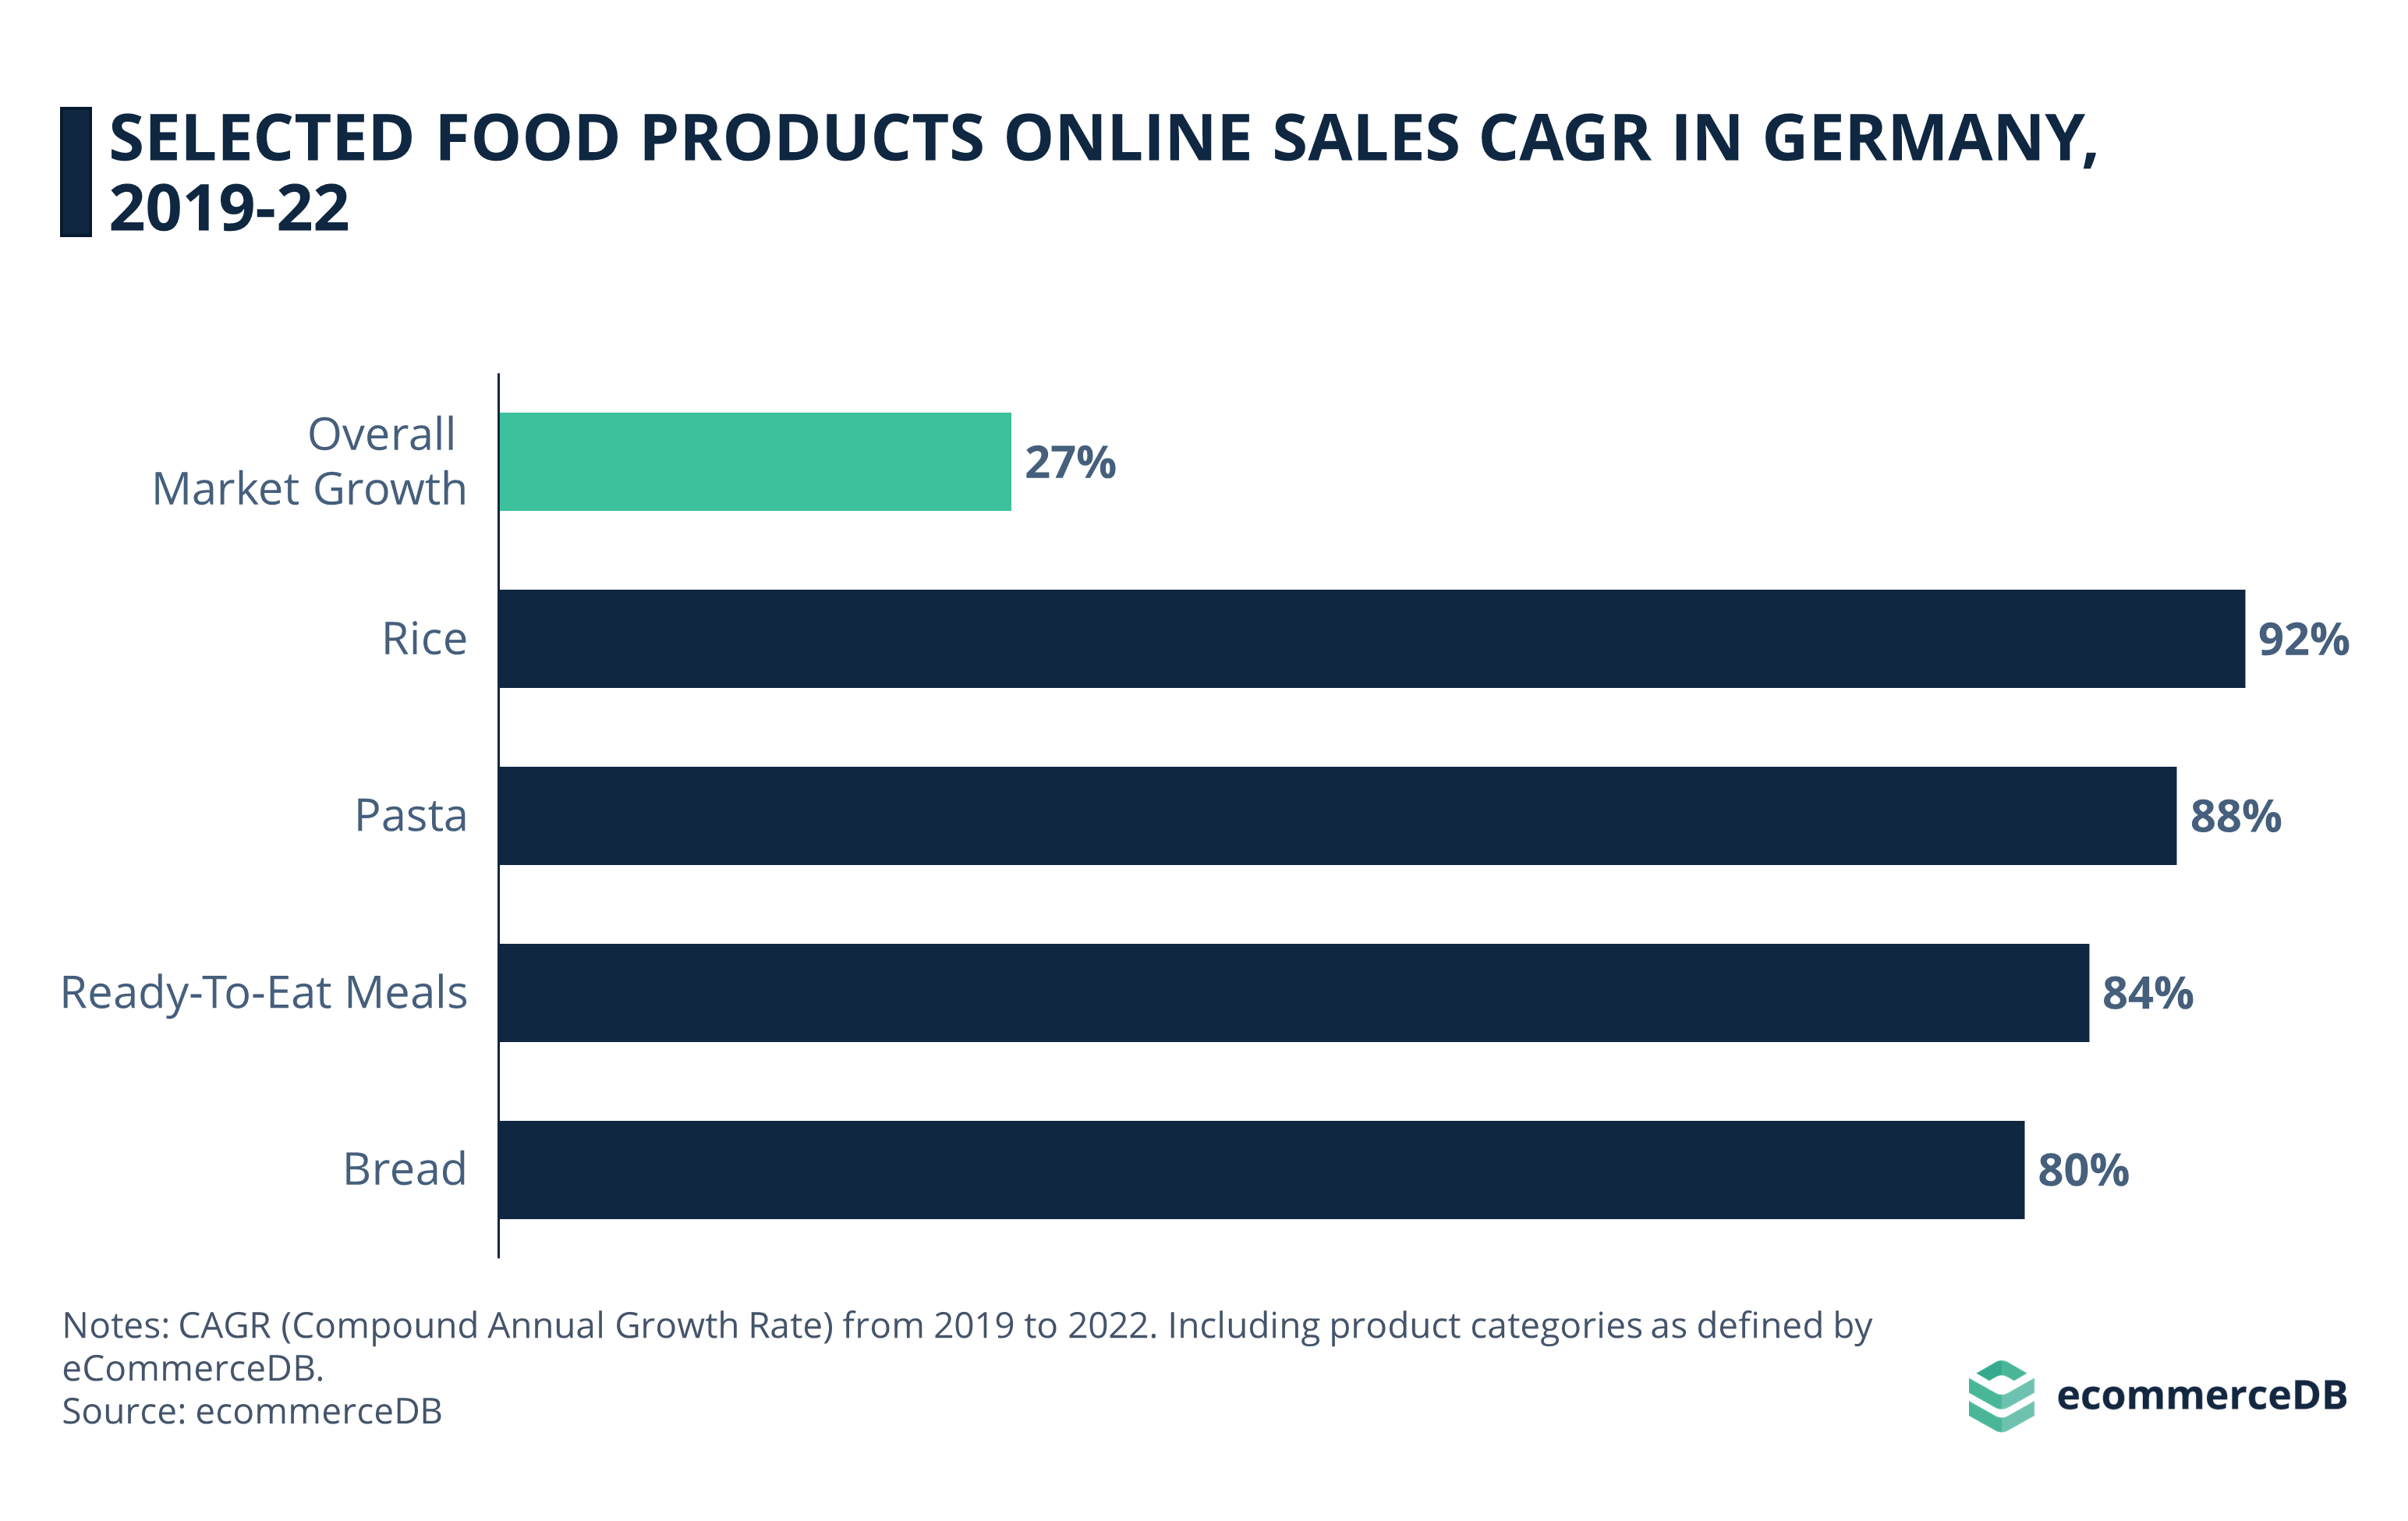 Convenience & Other Food Online Sales CAGR in Germany, 19-22